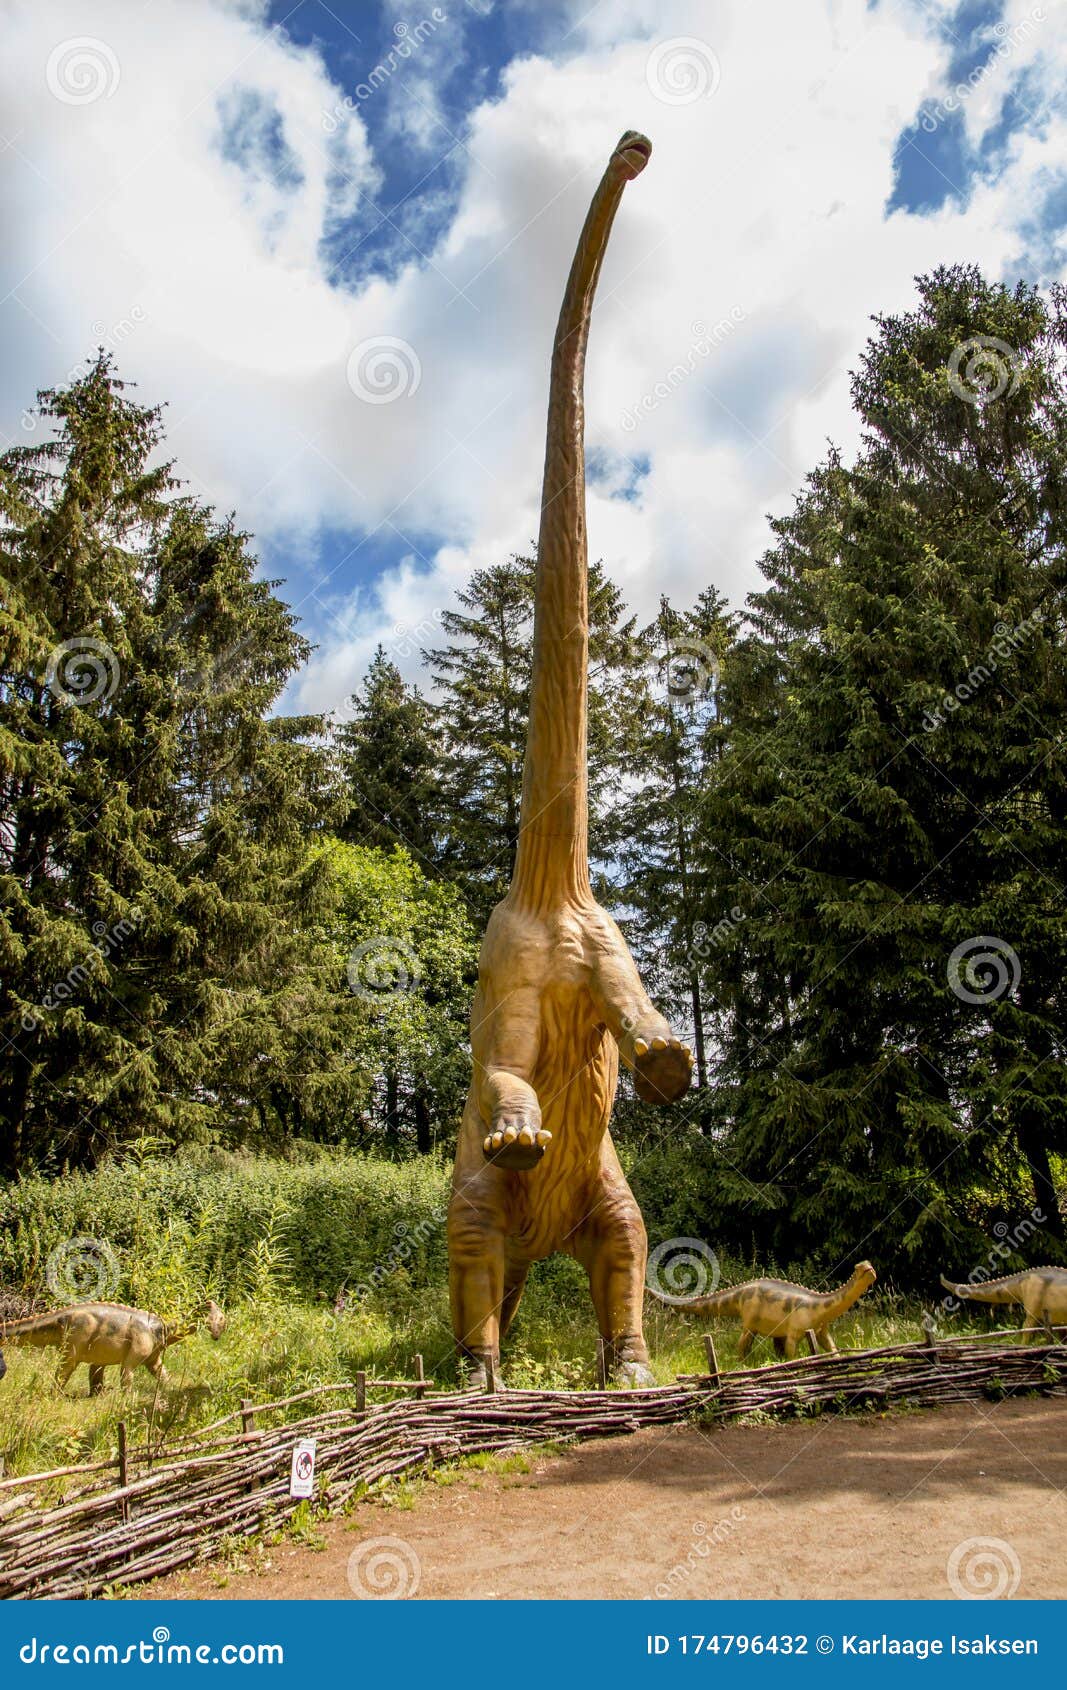  Dinosaurs  By Nature  Believe Sizes As They Were When They 